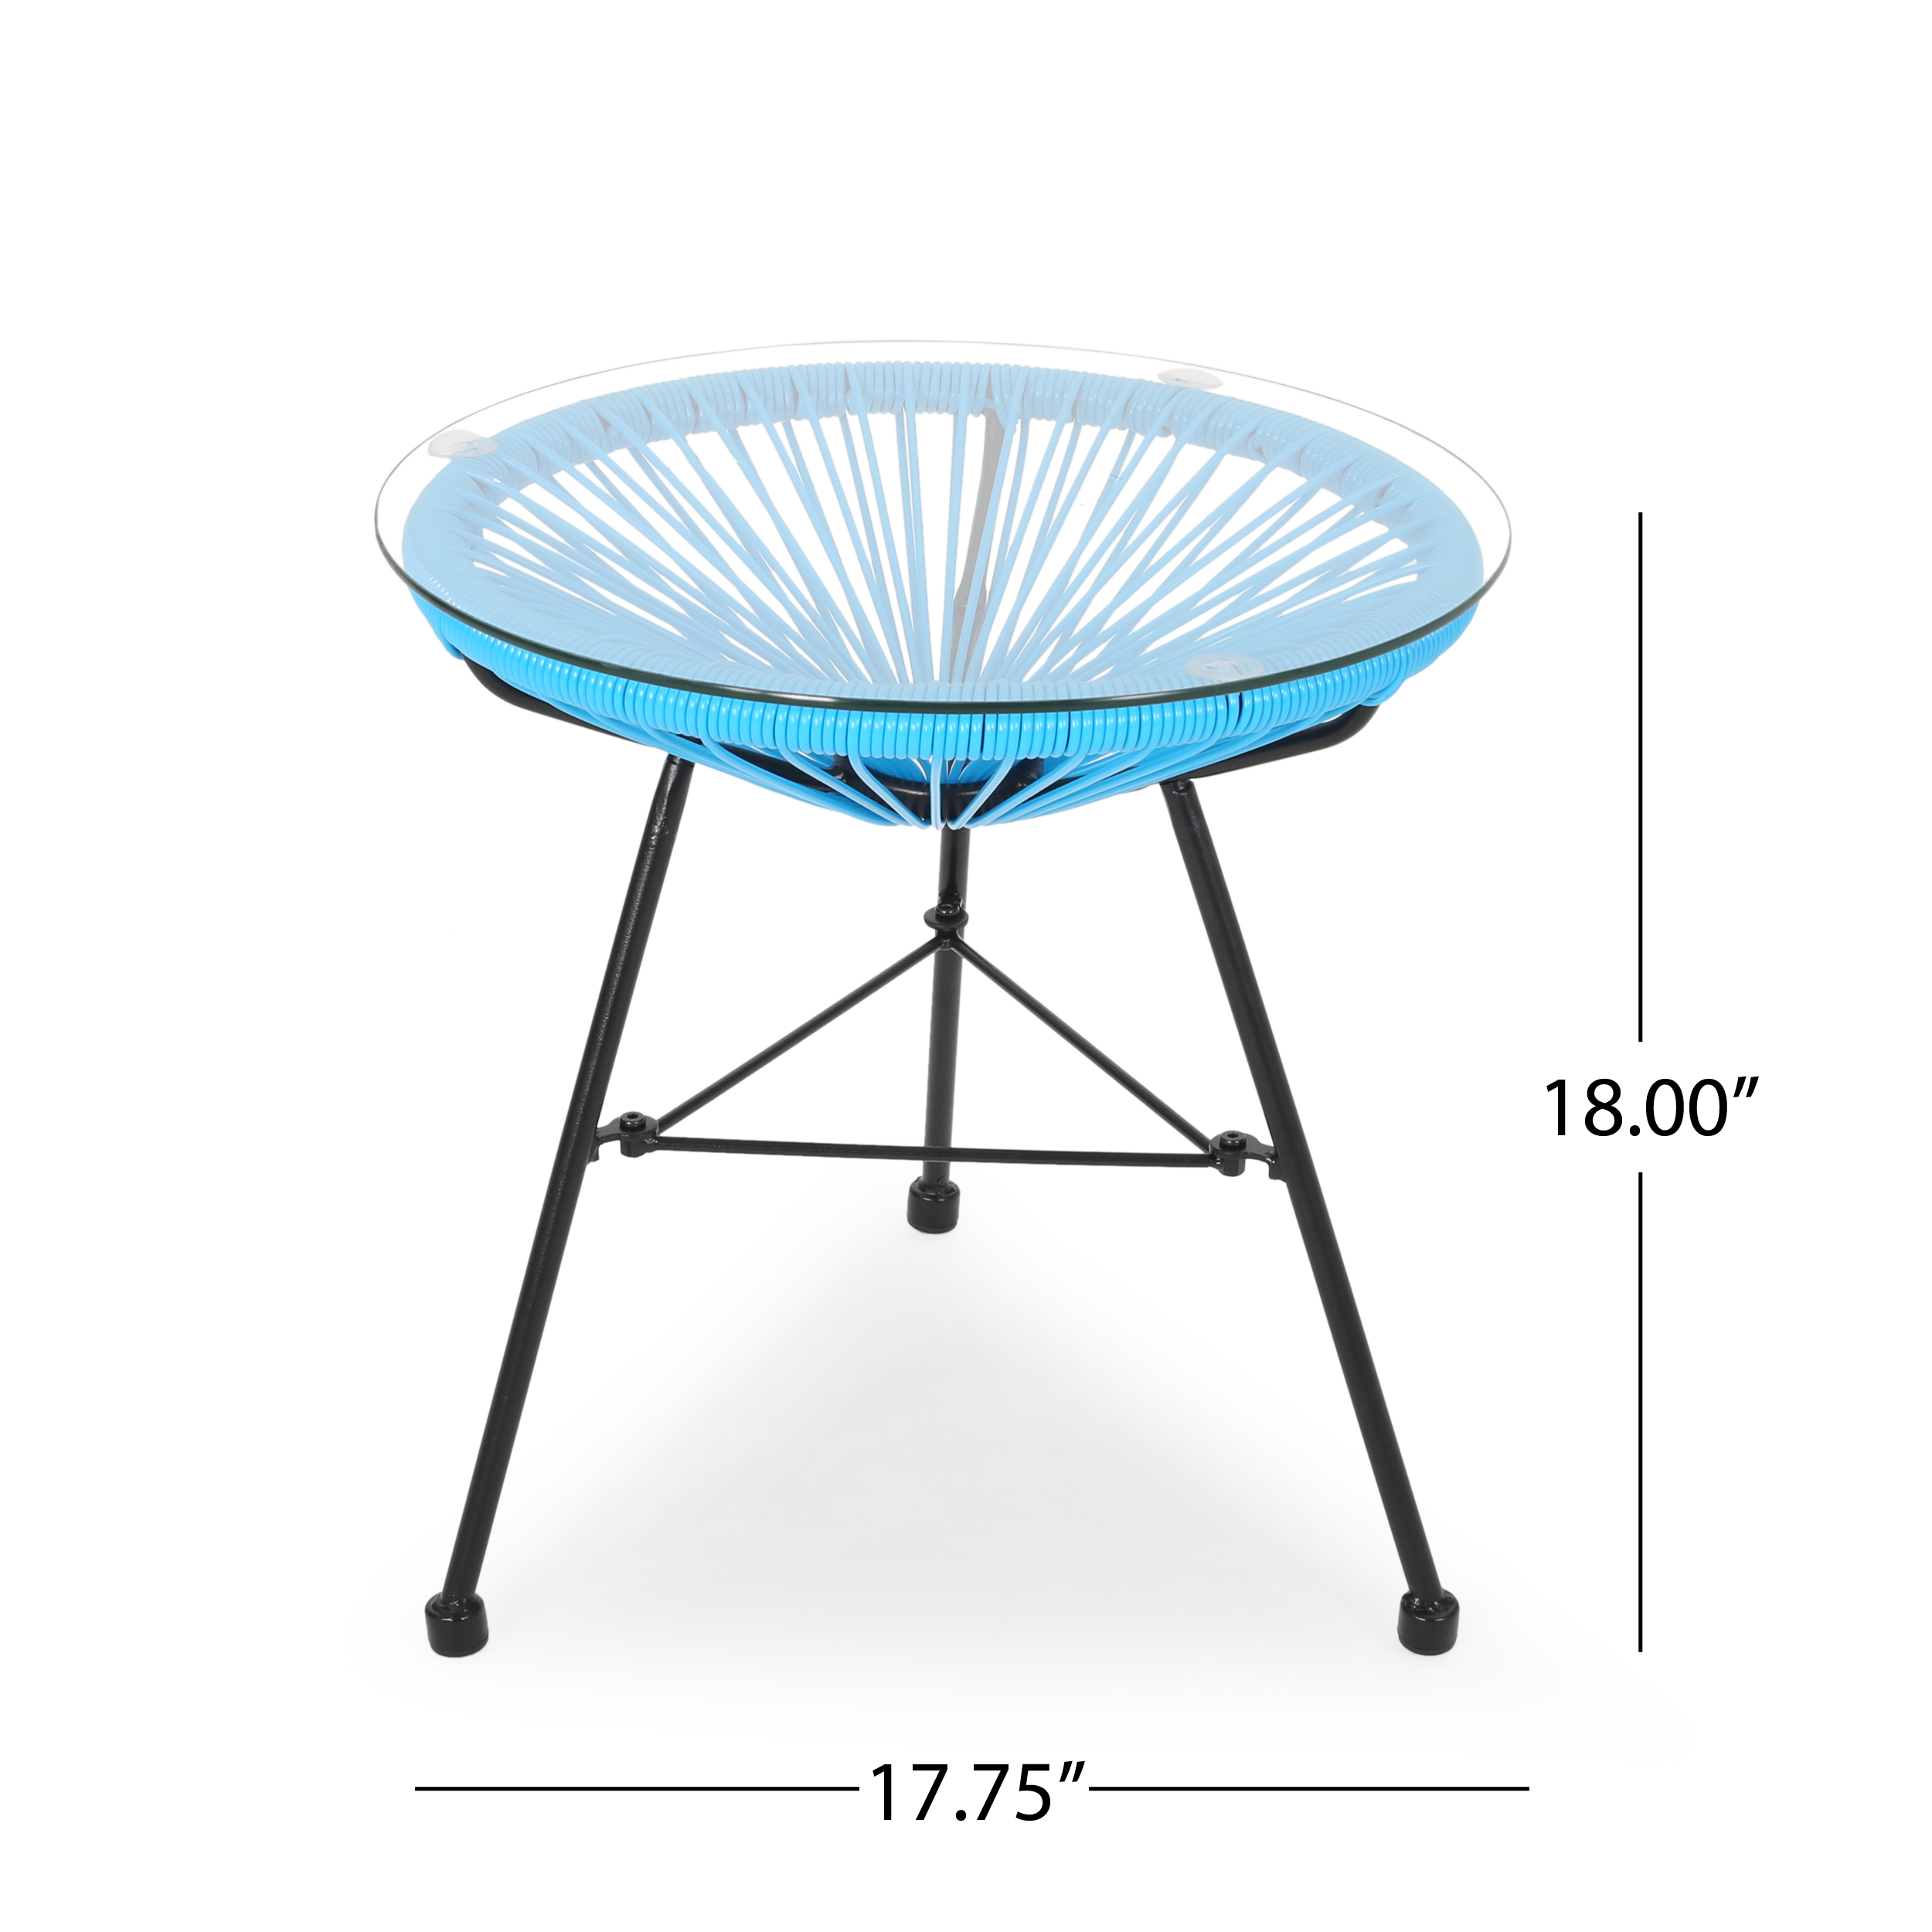 GDF Studio Chrissy Outdoor Modern Faux Rattan Side Table with Tempered Glass Top, Blue and Black - image 5 of 9